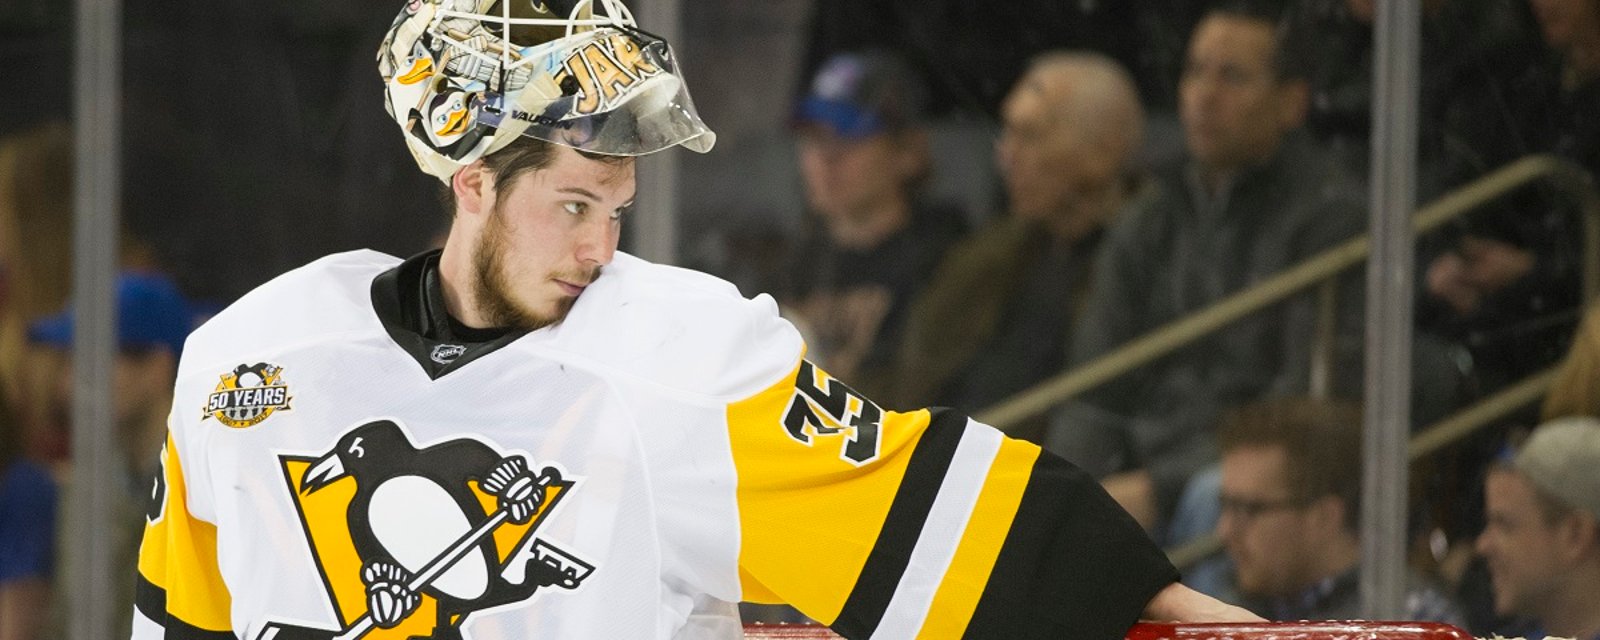 Breaking: Penguins sign a new goalie after injury to Tristan Jarry.